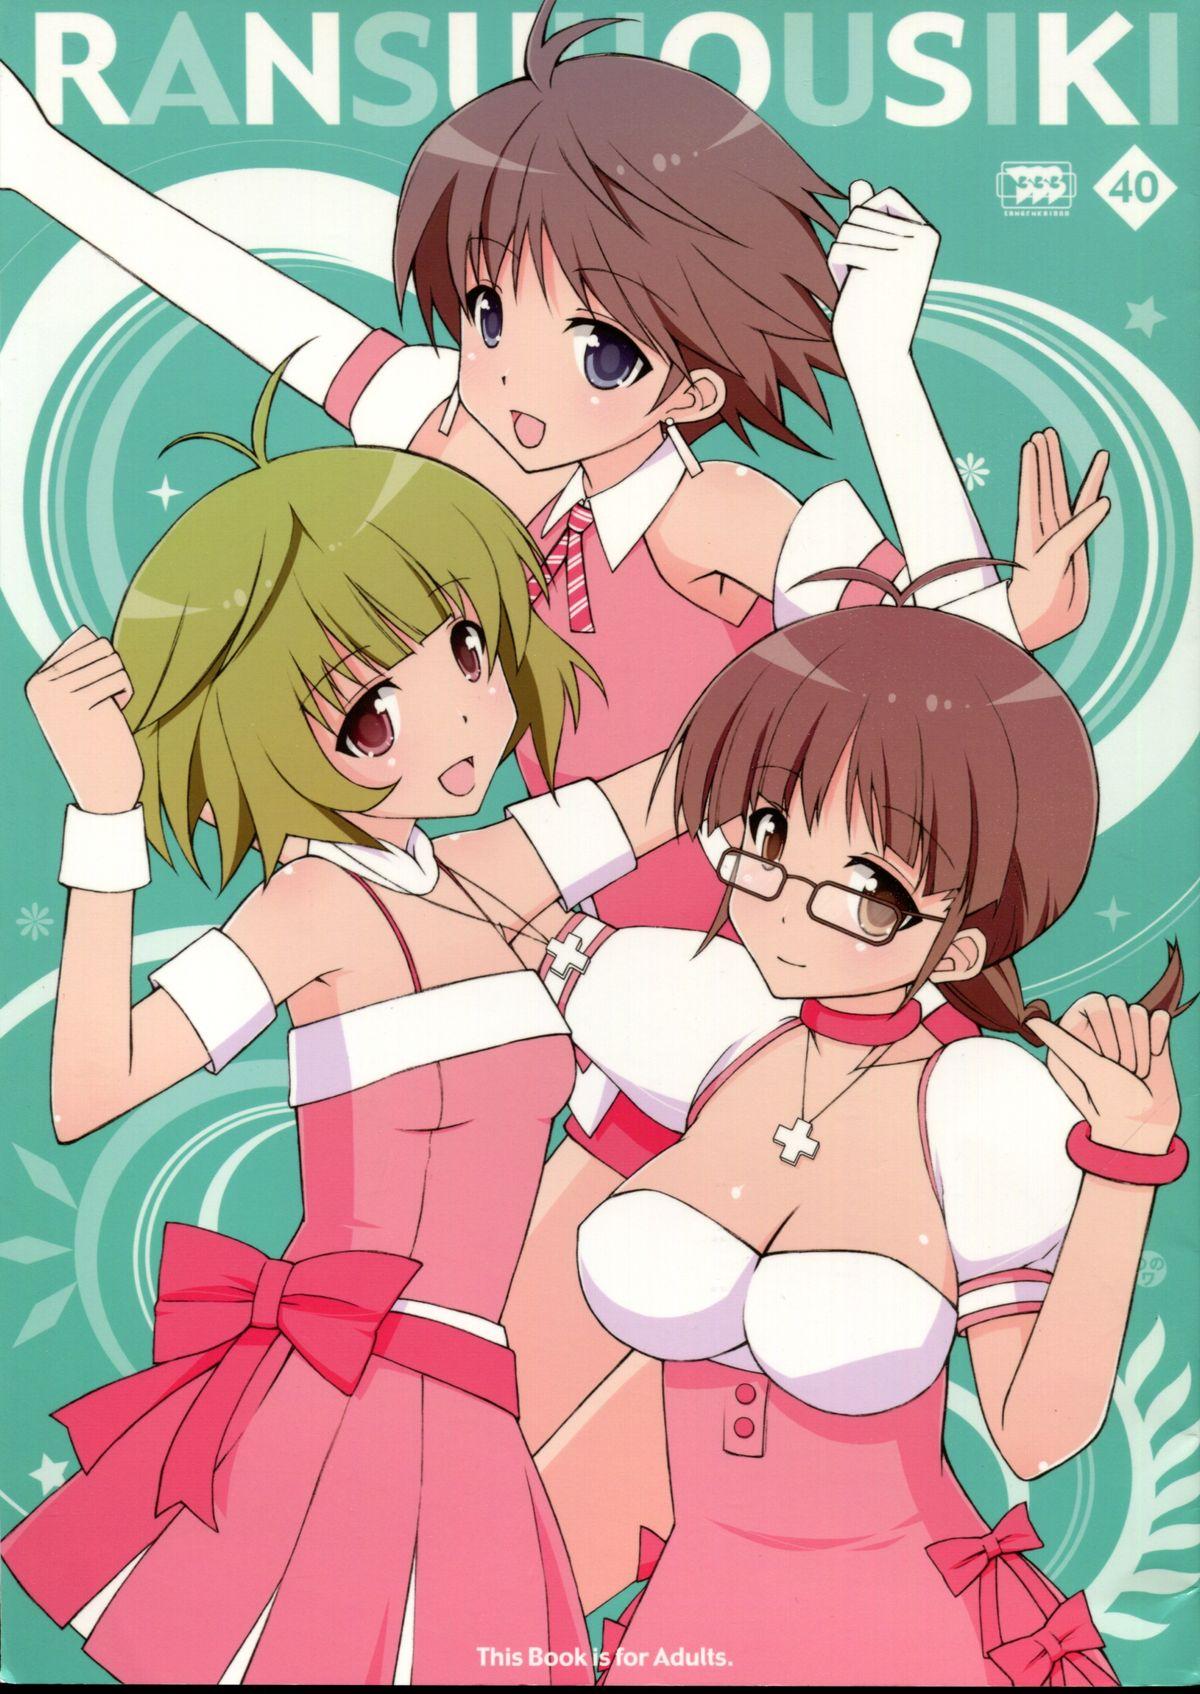 Colombian RANSUHOUSIKI 40 - The idolmaster Jerking - Picture 1